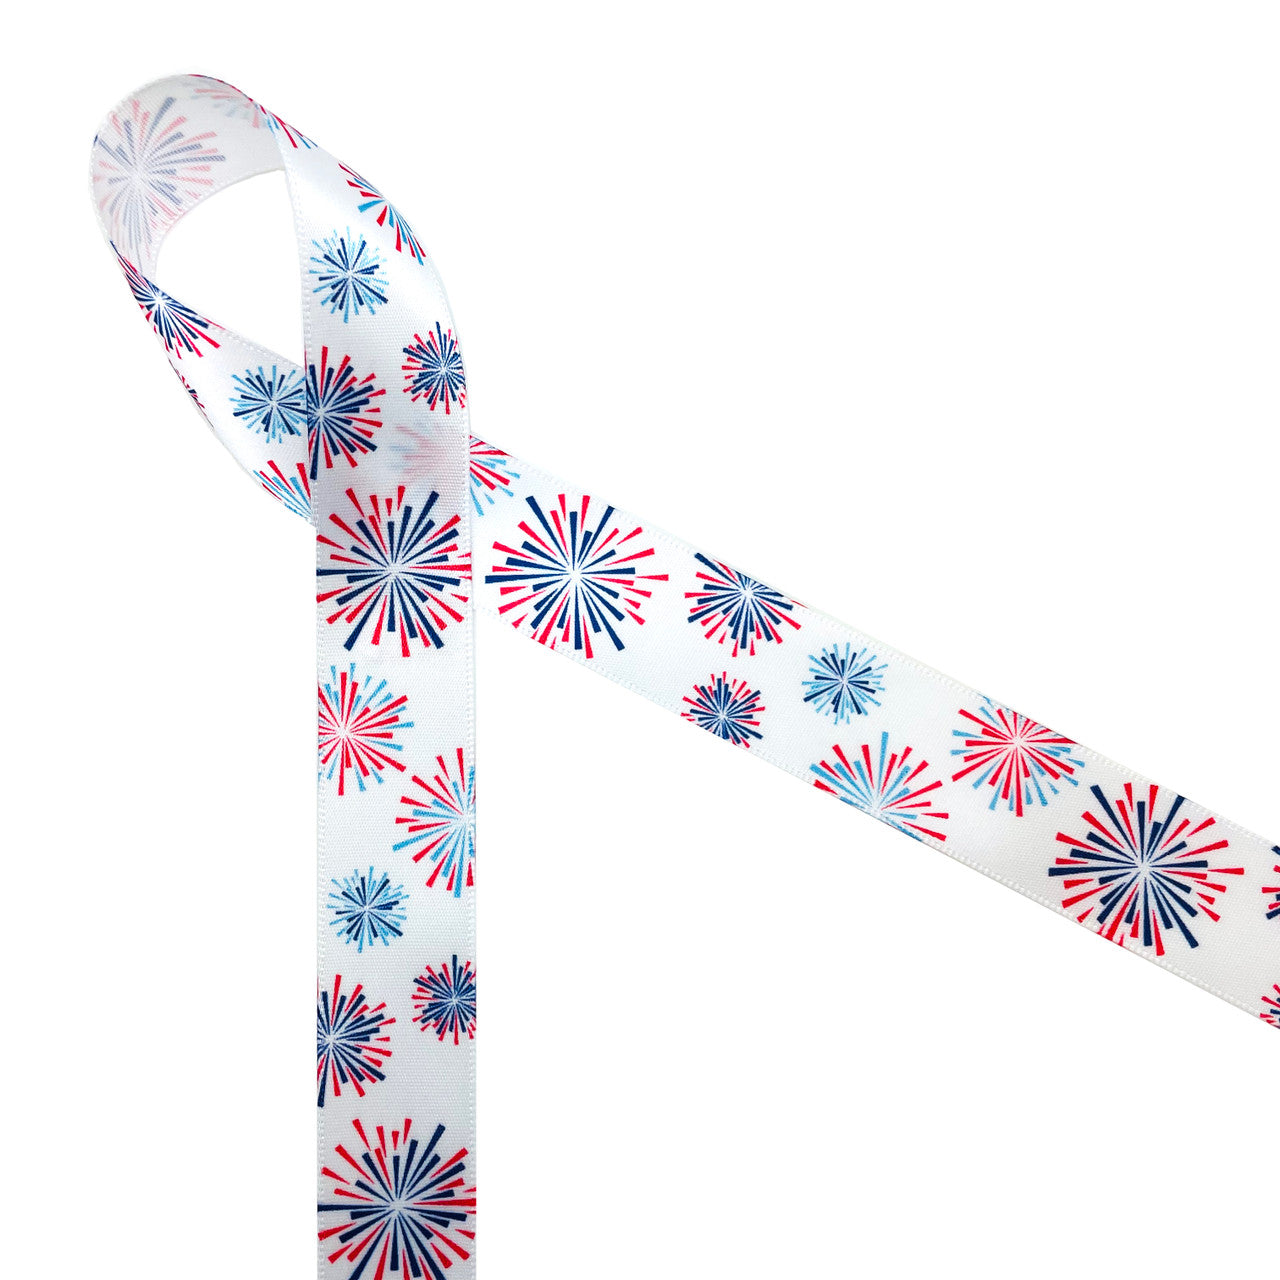 Fireworks ribbon in red, white and blue is the perfect ribbon for any Independence Day celebration. This ribbon features bursts of patriotic fire works printed on 7/8" white single face satin. Be sure to have this ribbon on hand for all your 4th of July celebrations for gift wrap, party decor, party favors, crafts and quilting. All our ribbon  is designed and printed in the USA